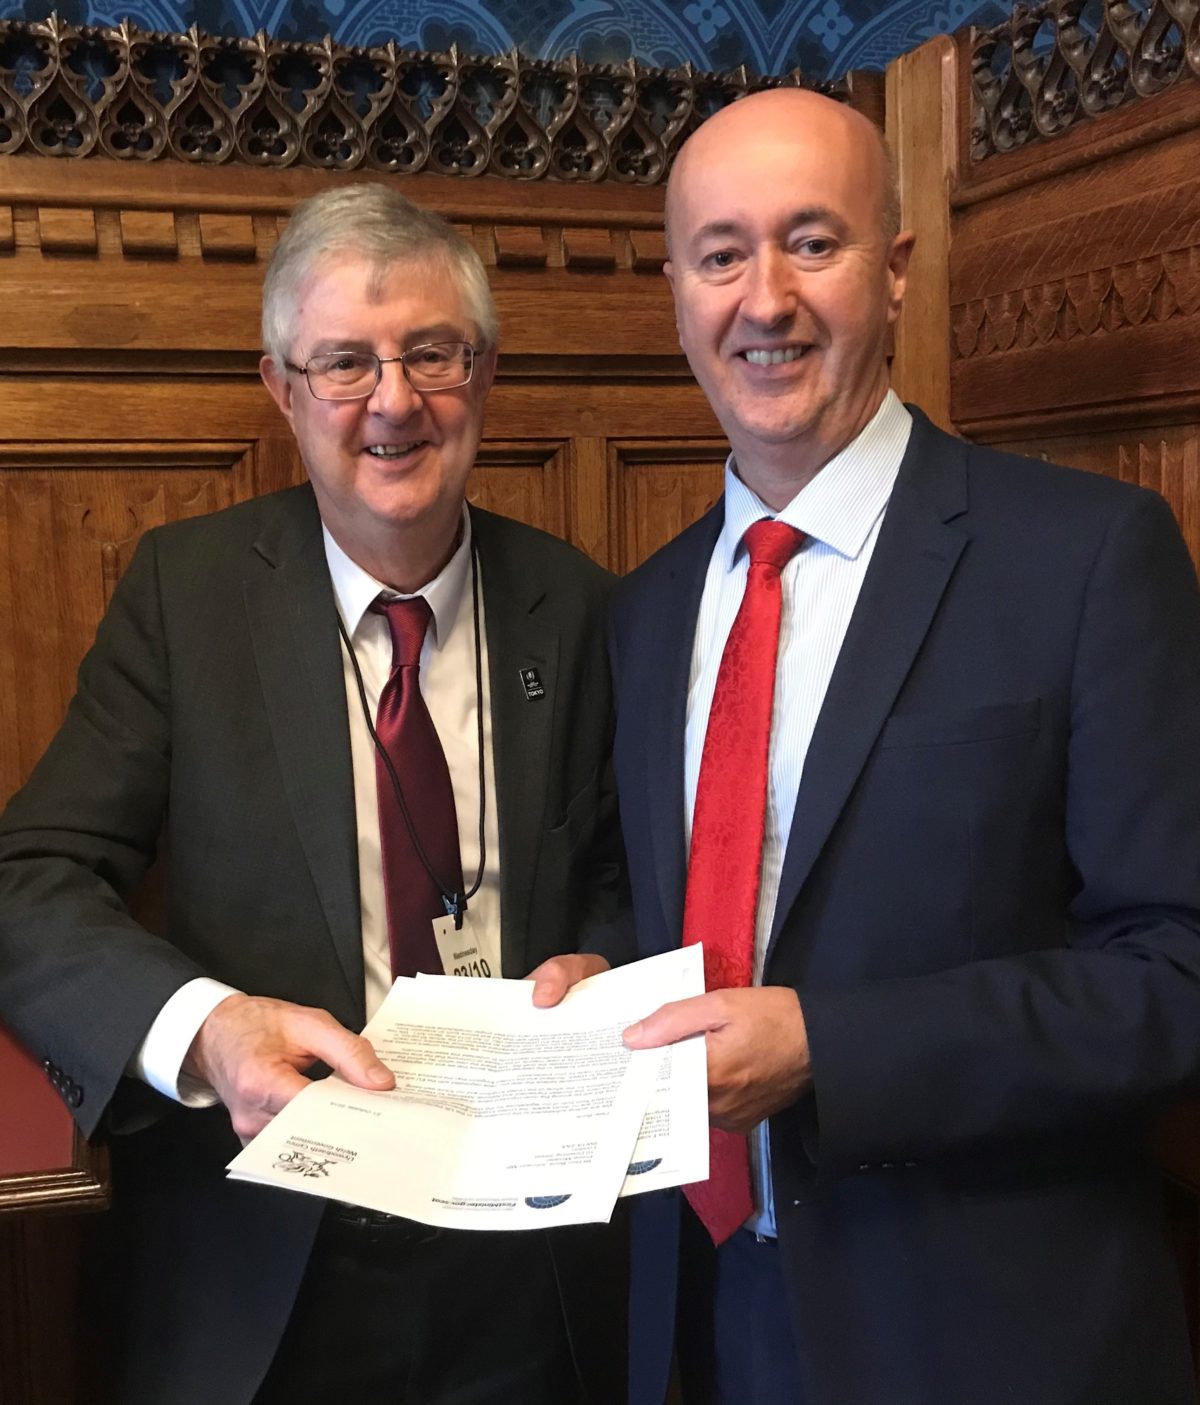 Geraint Davies, MP with First Minister of Wales, Mark Drakeford.